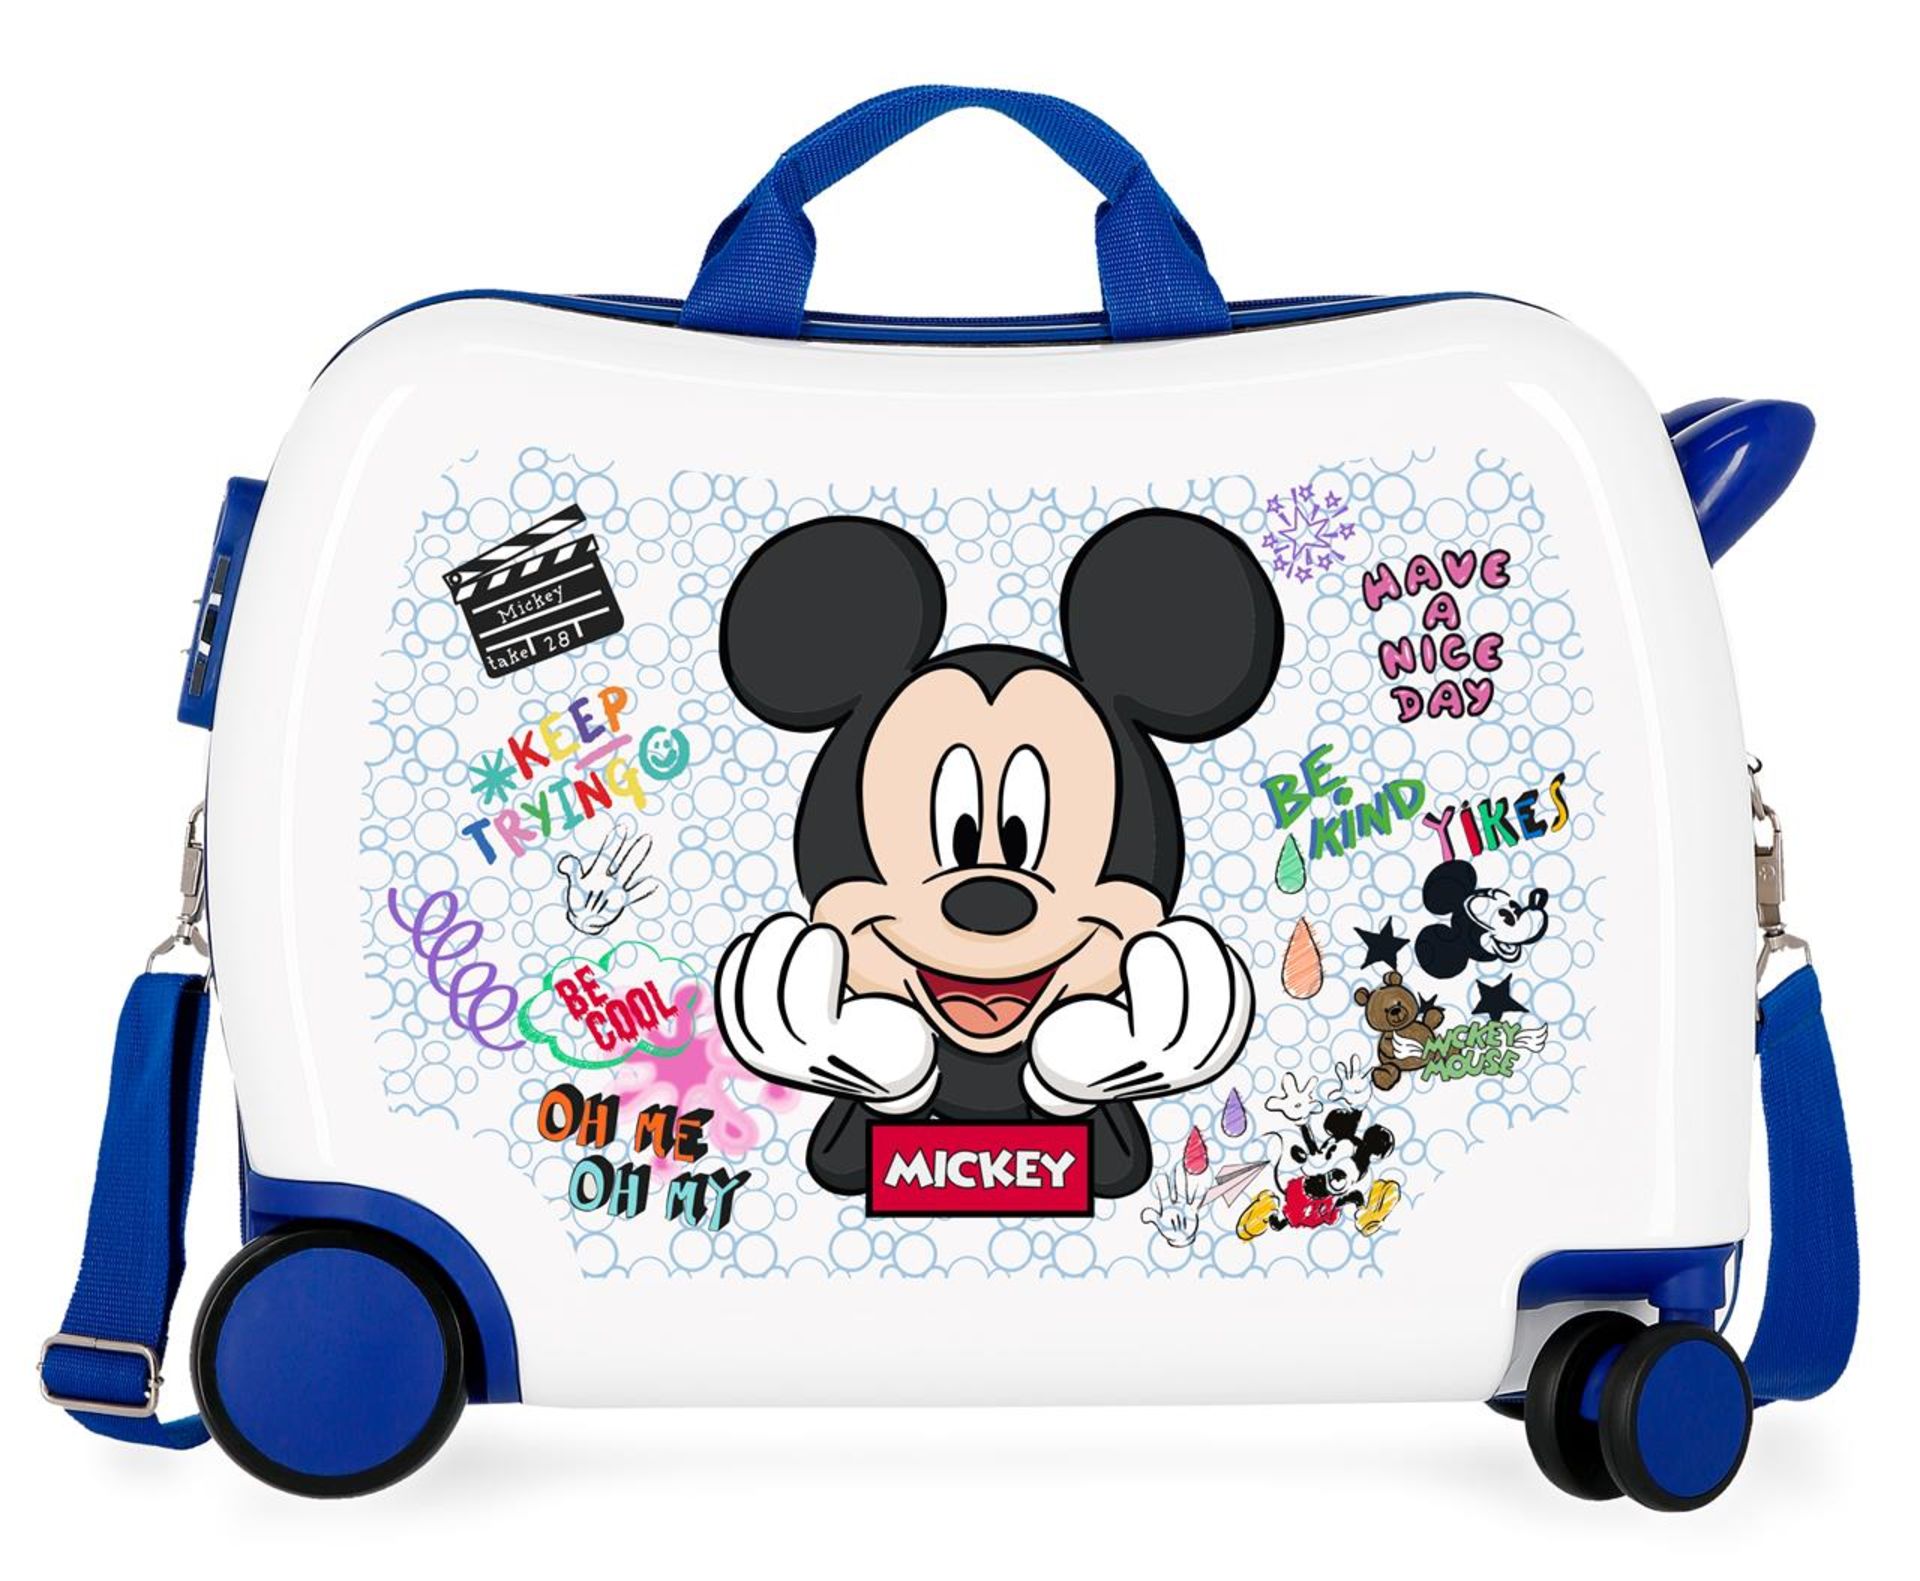 Pallet Of 48 Joumma Bags Rolling Suitcases In Various Disney Designs And Colours 50X38X20 Cm - Image 54 of 102